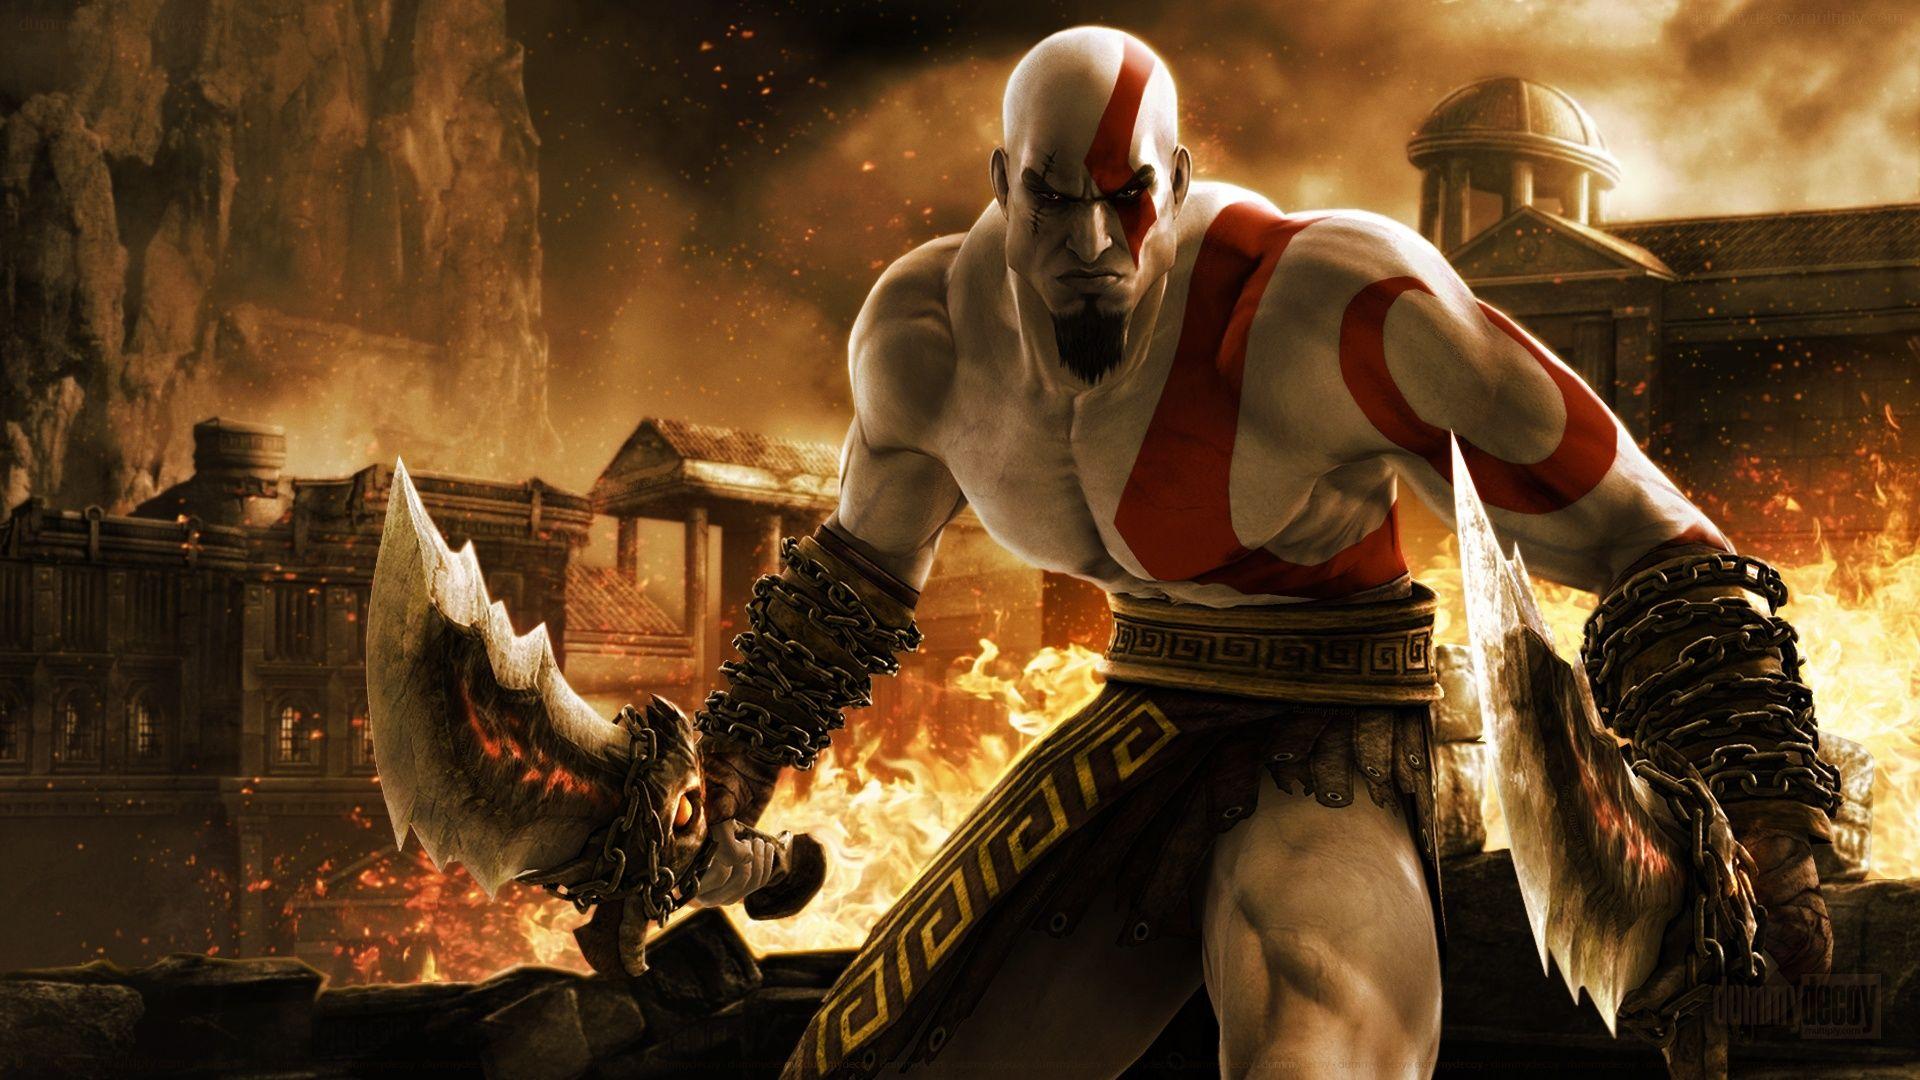 god of war 3 photo cool image free high definition colourful